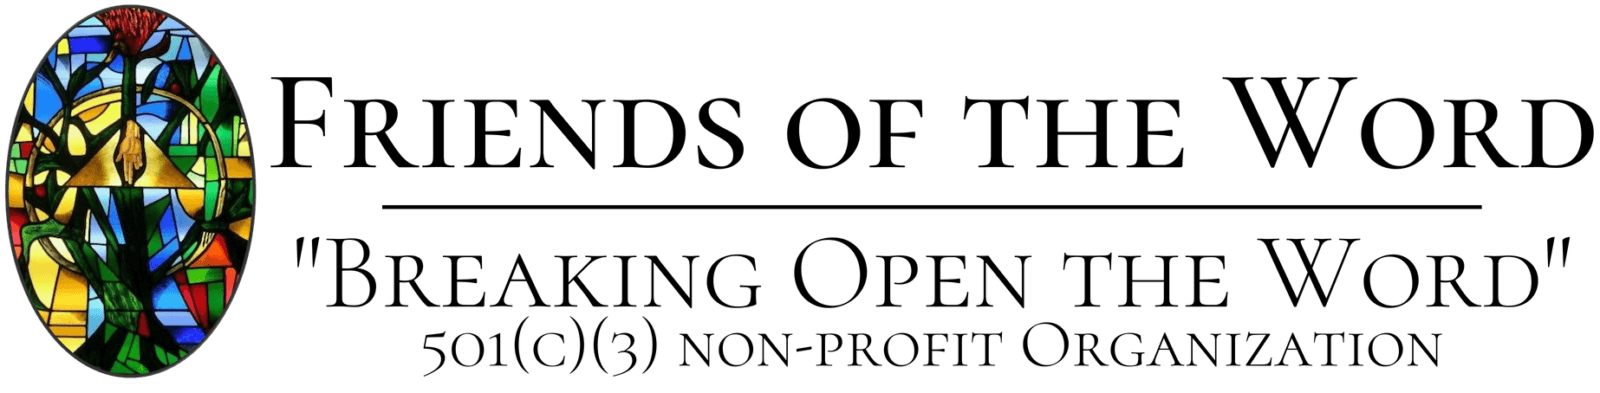 Friends of the Word Inc. "Breaking Open the Word"